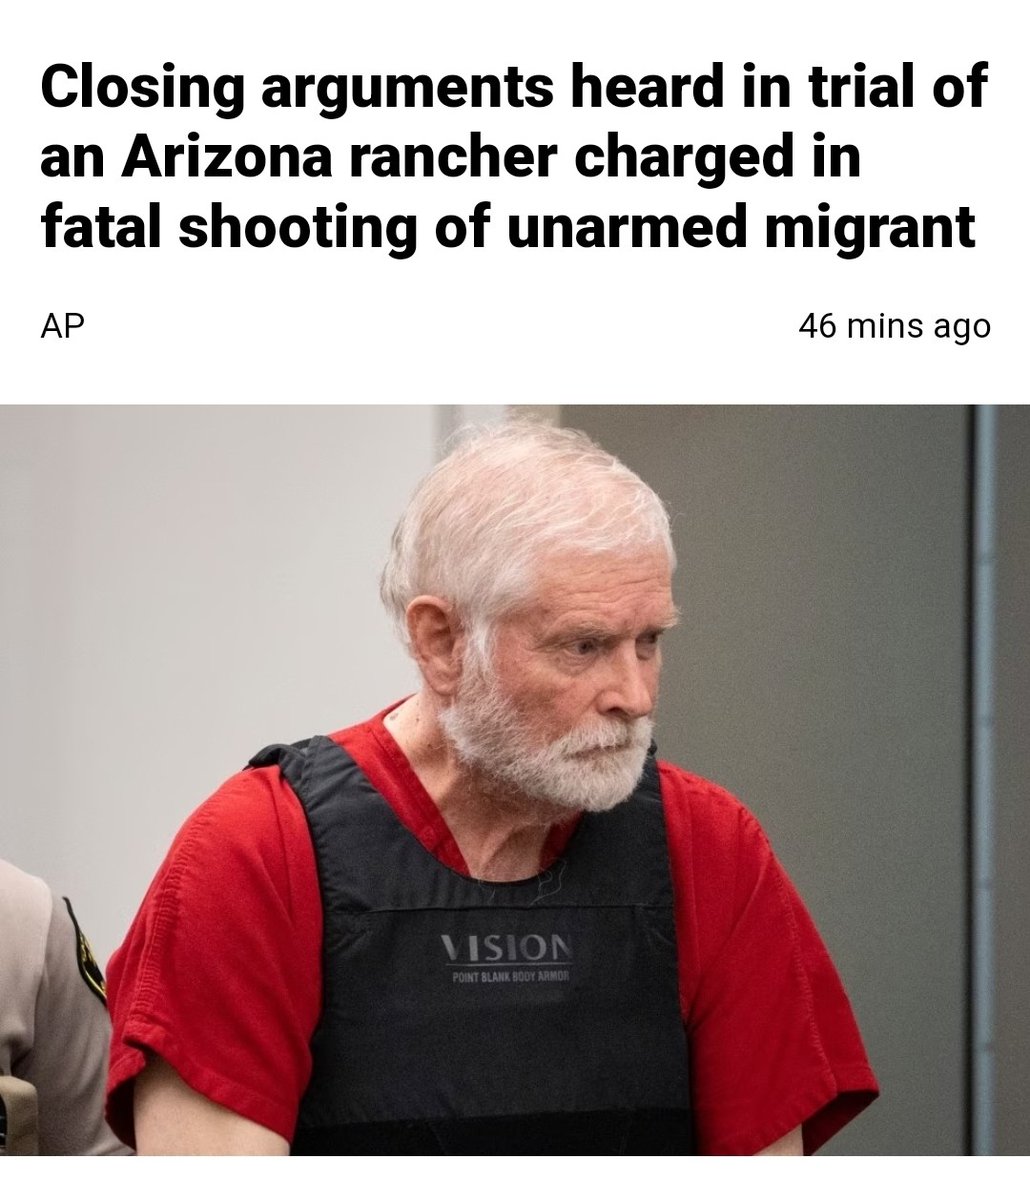 I pray this innocent rancher is found Not Guilty. The illegal criminals had no rights being on this man's land. Who else believes he is Not Guilty??